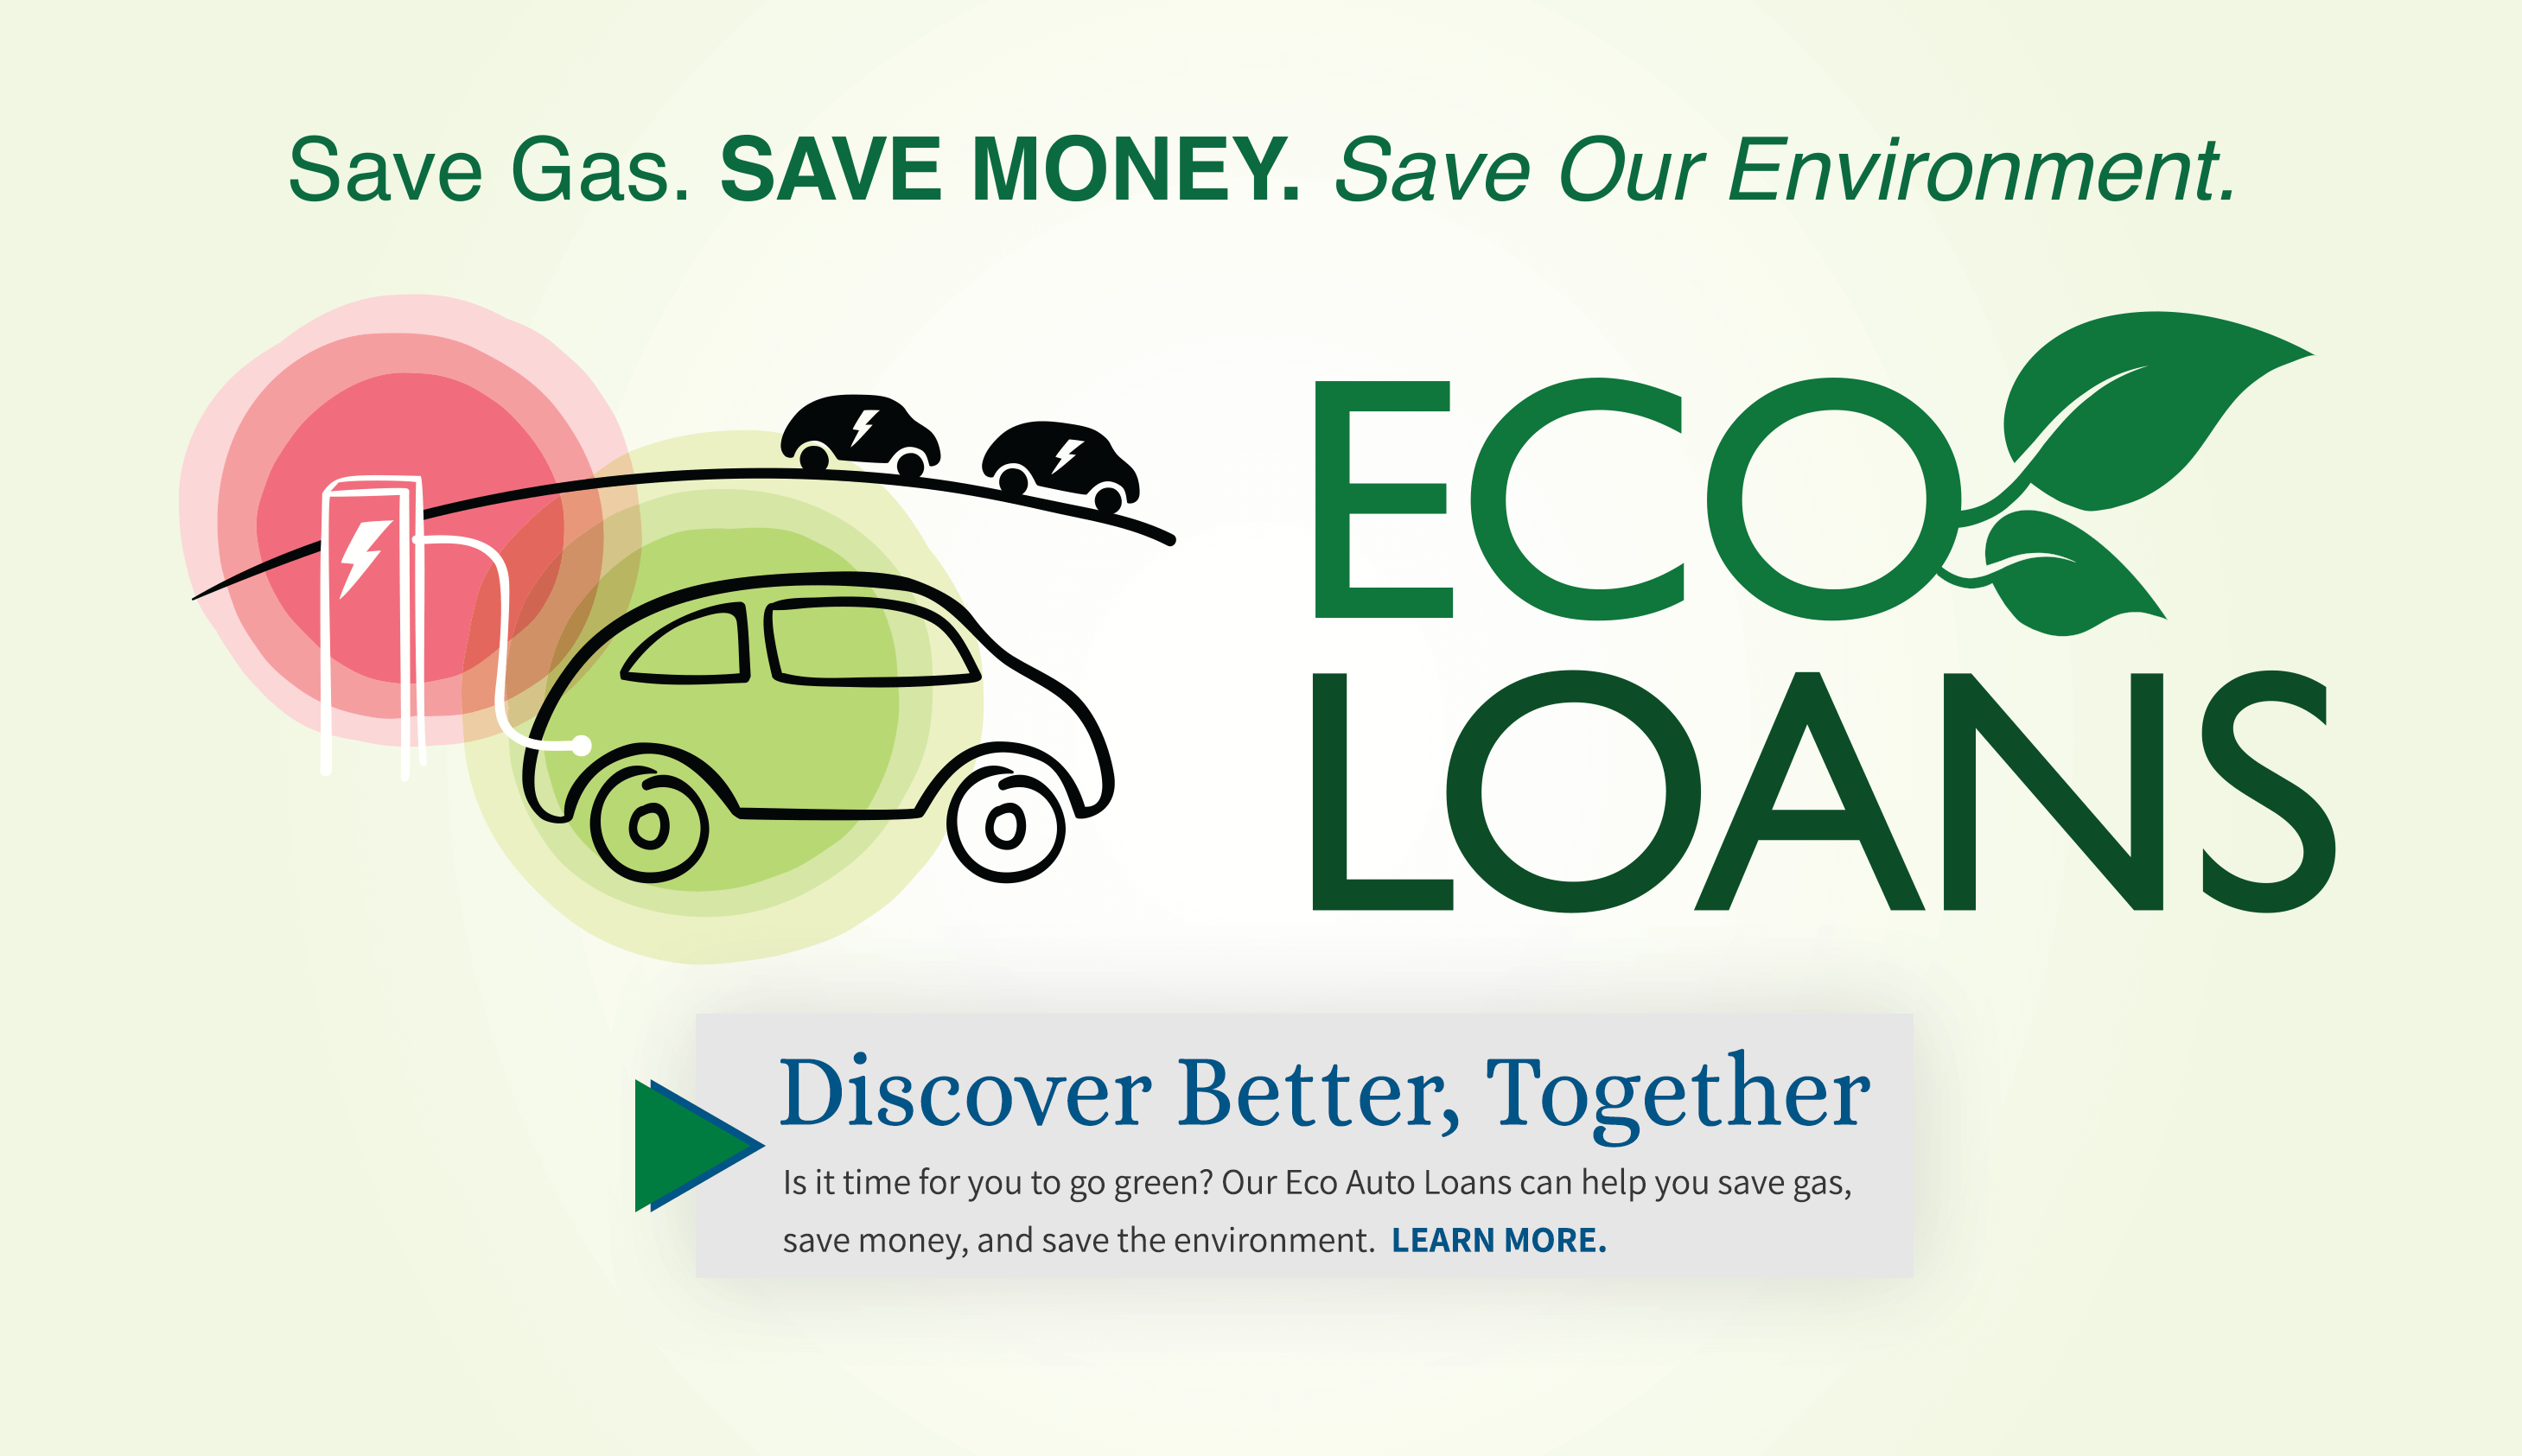 Save gas. Save money, Save the environment. Eco loans. Discover better together. Is it time for you to go green? Our eco auto loans can help you save gas, save money, and save the environment. Learn more.